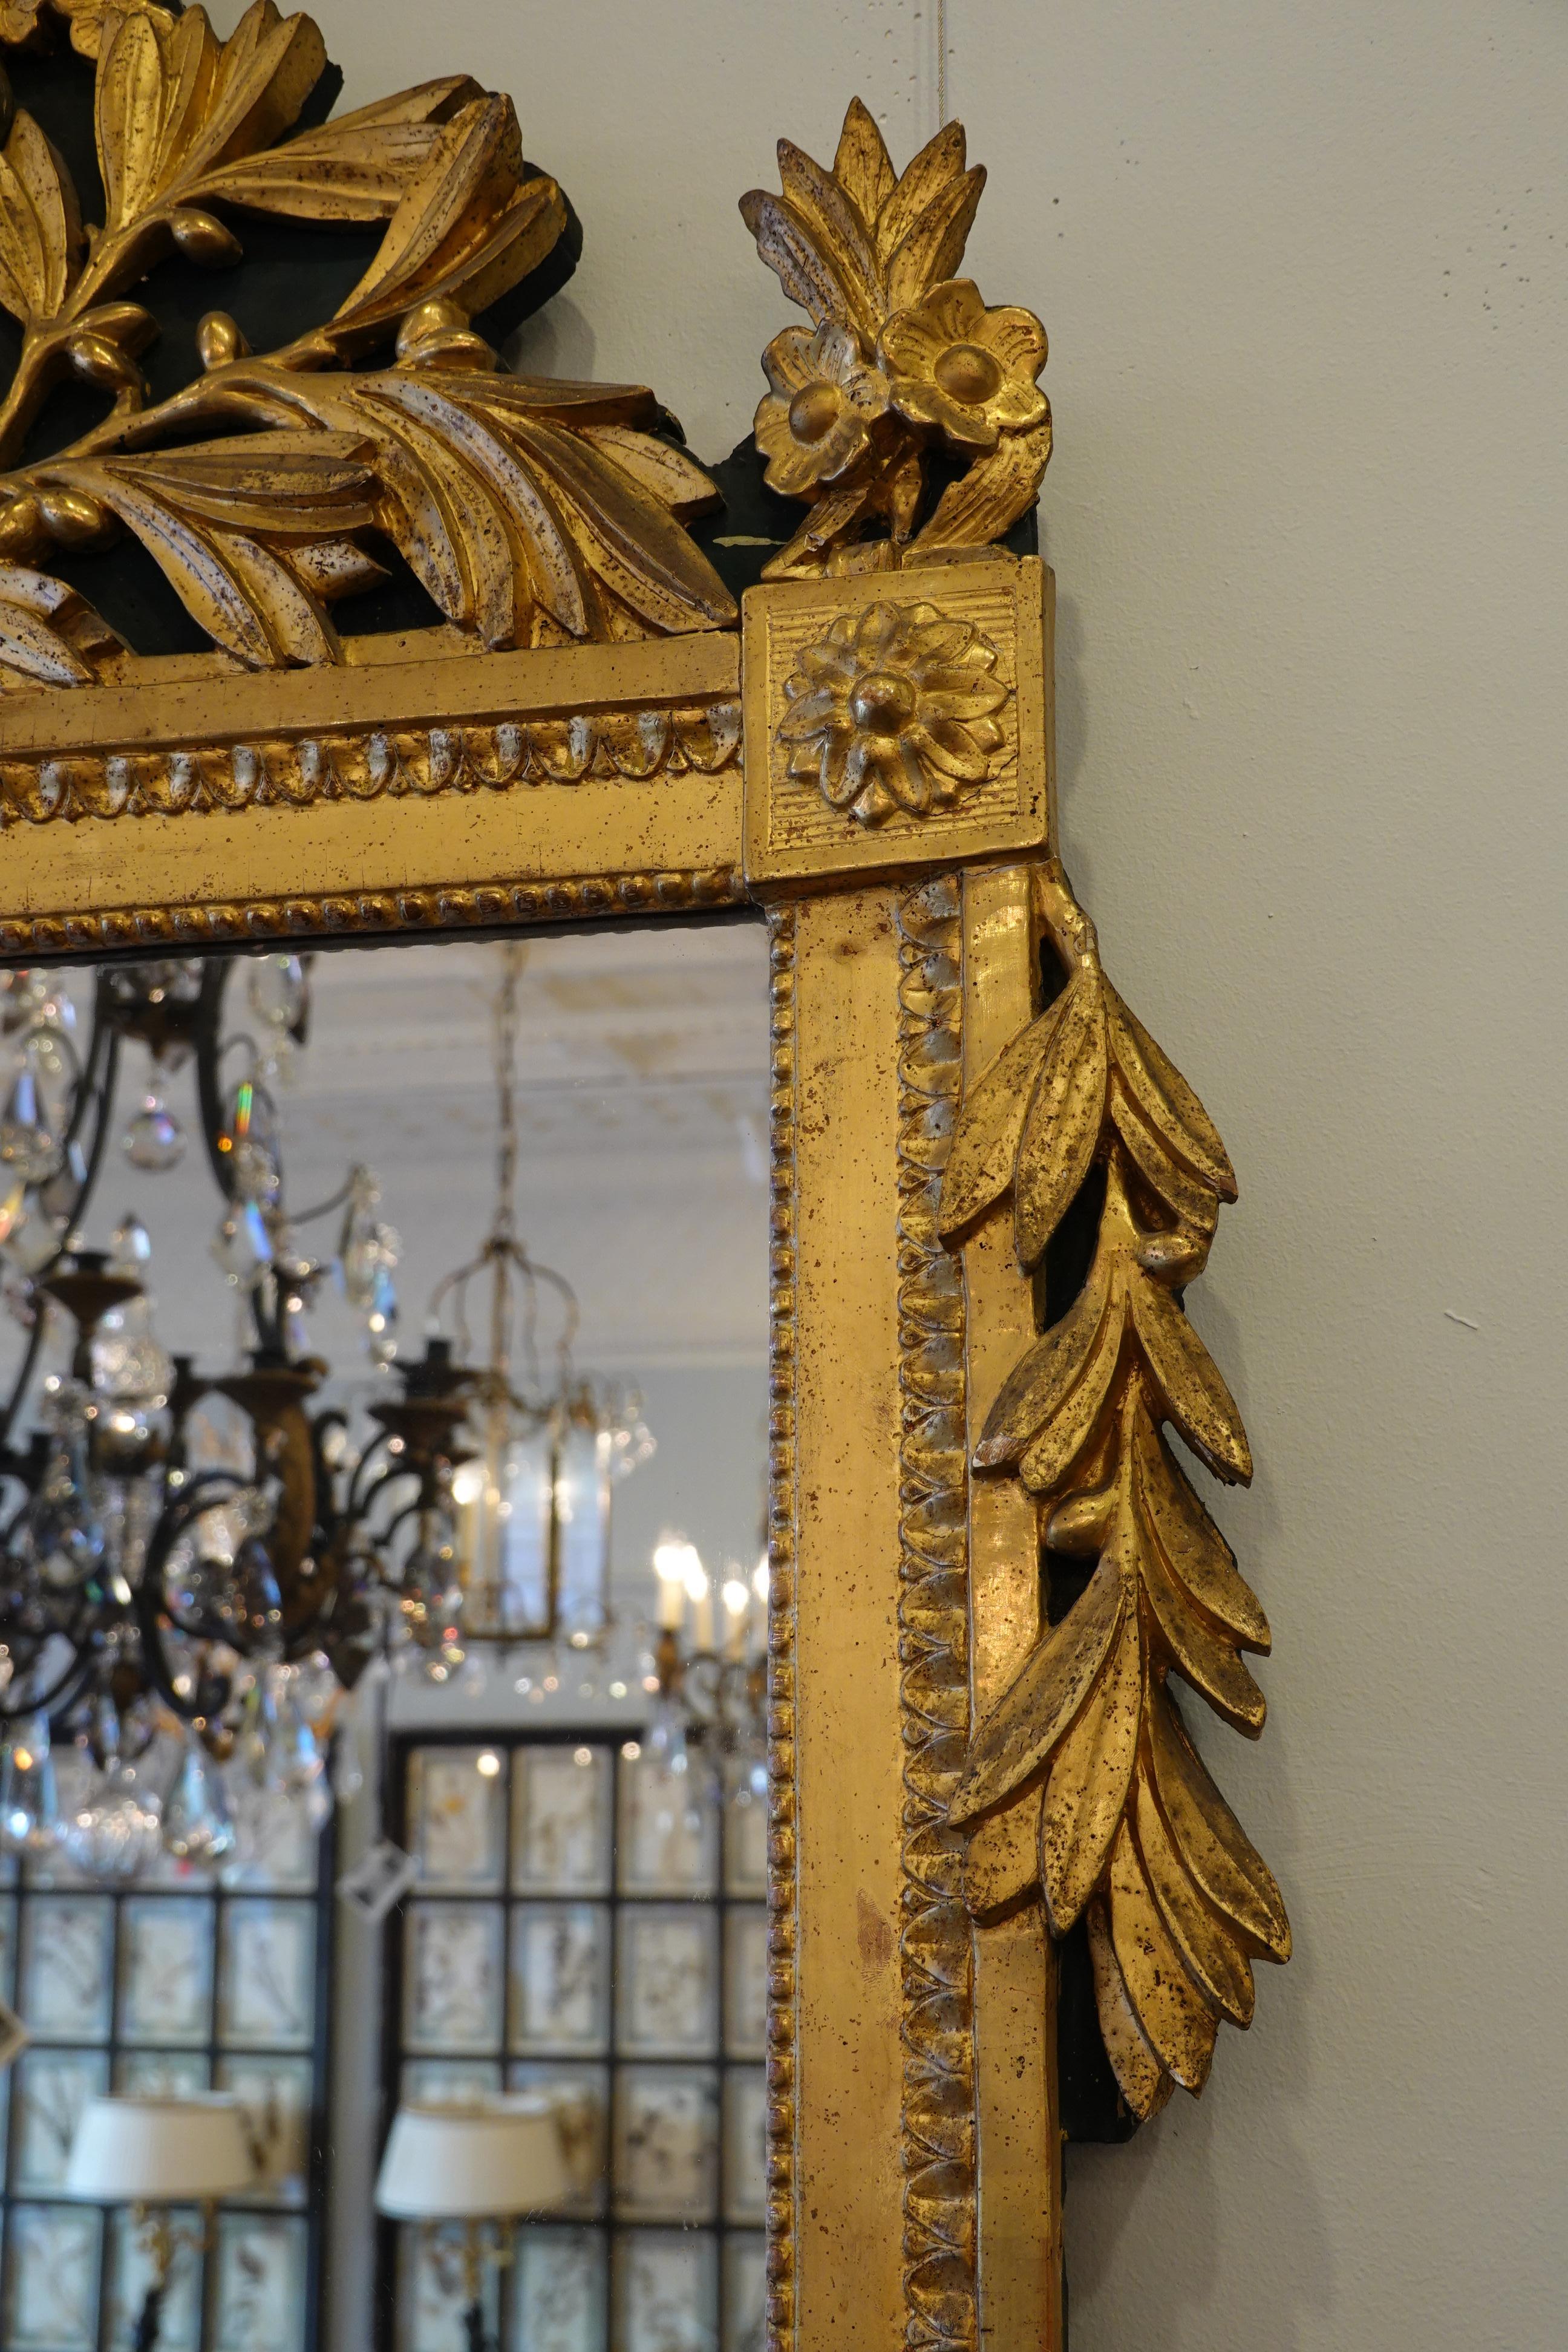 Louis XVI Period Giltwood Trumeau Mirror with Urn, Flowers and Laurel Leaves In Good Condition For Sale In Pembroke, MA